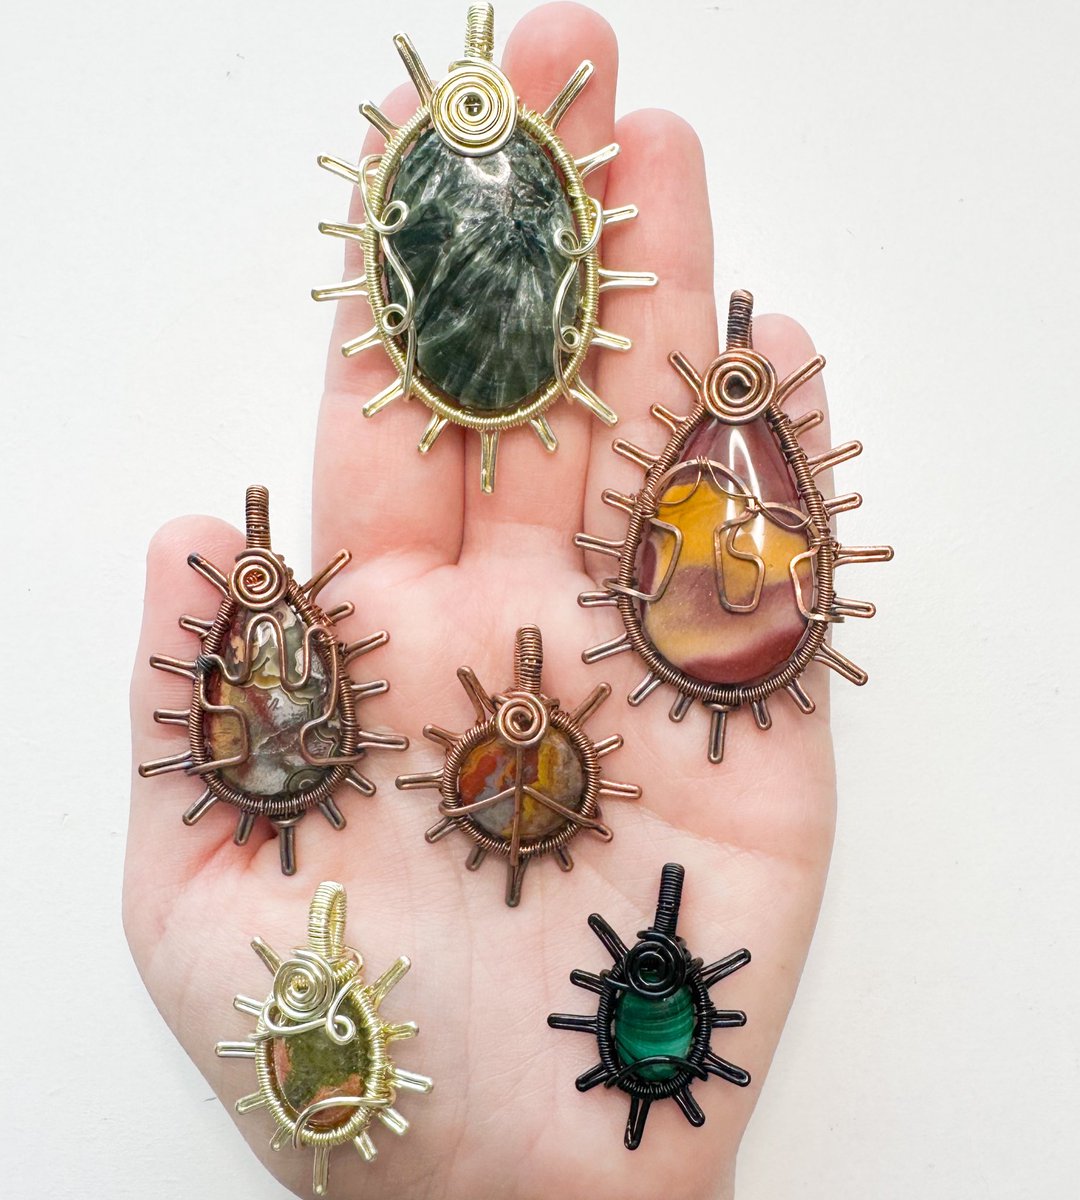 handfuls of handmade pendants 🌞🌻 all available Nov. 10th at 8pm eastern time